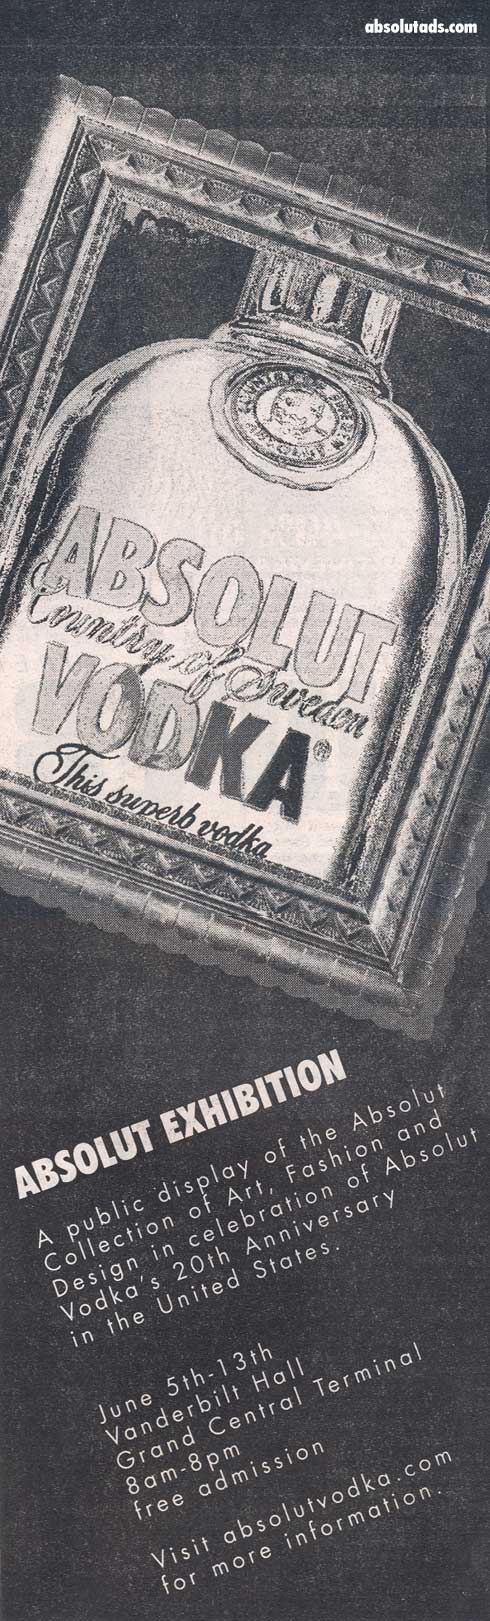 Absolut Exhibition